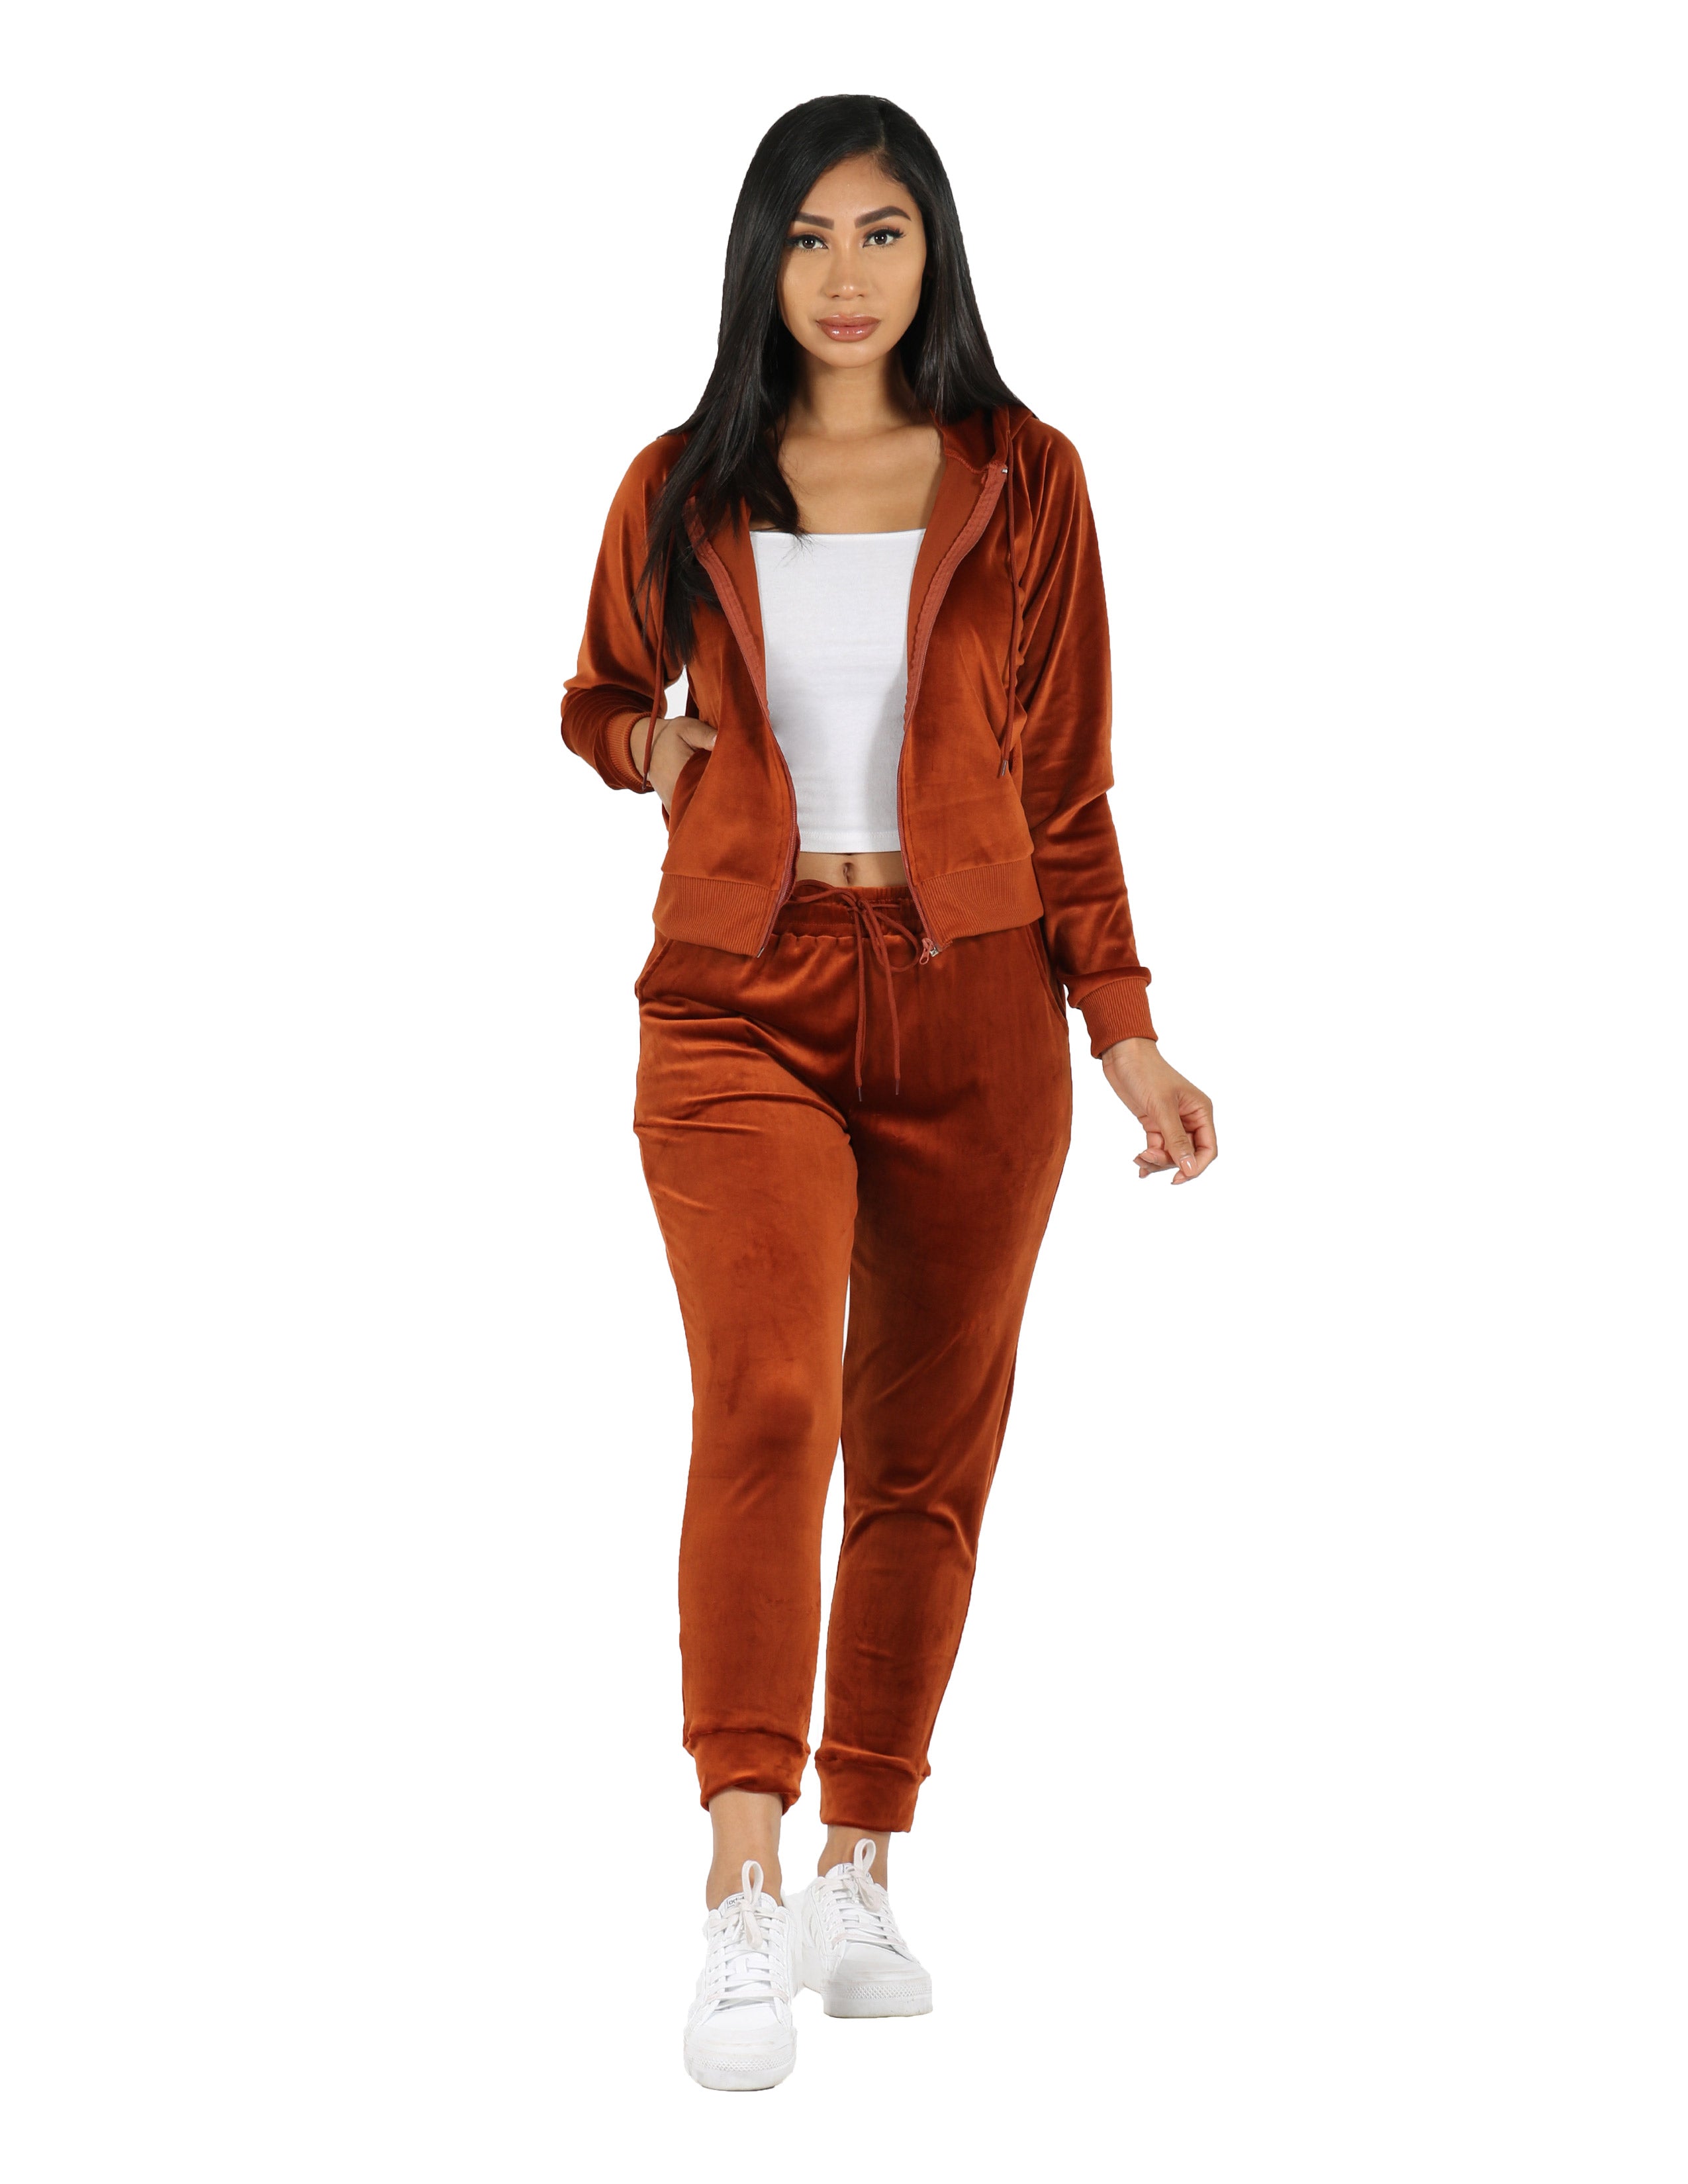 She's Verified Zip Hoodie Jacket and Jogger Velour Active Set